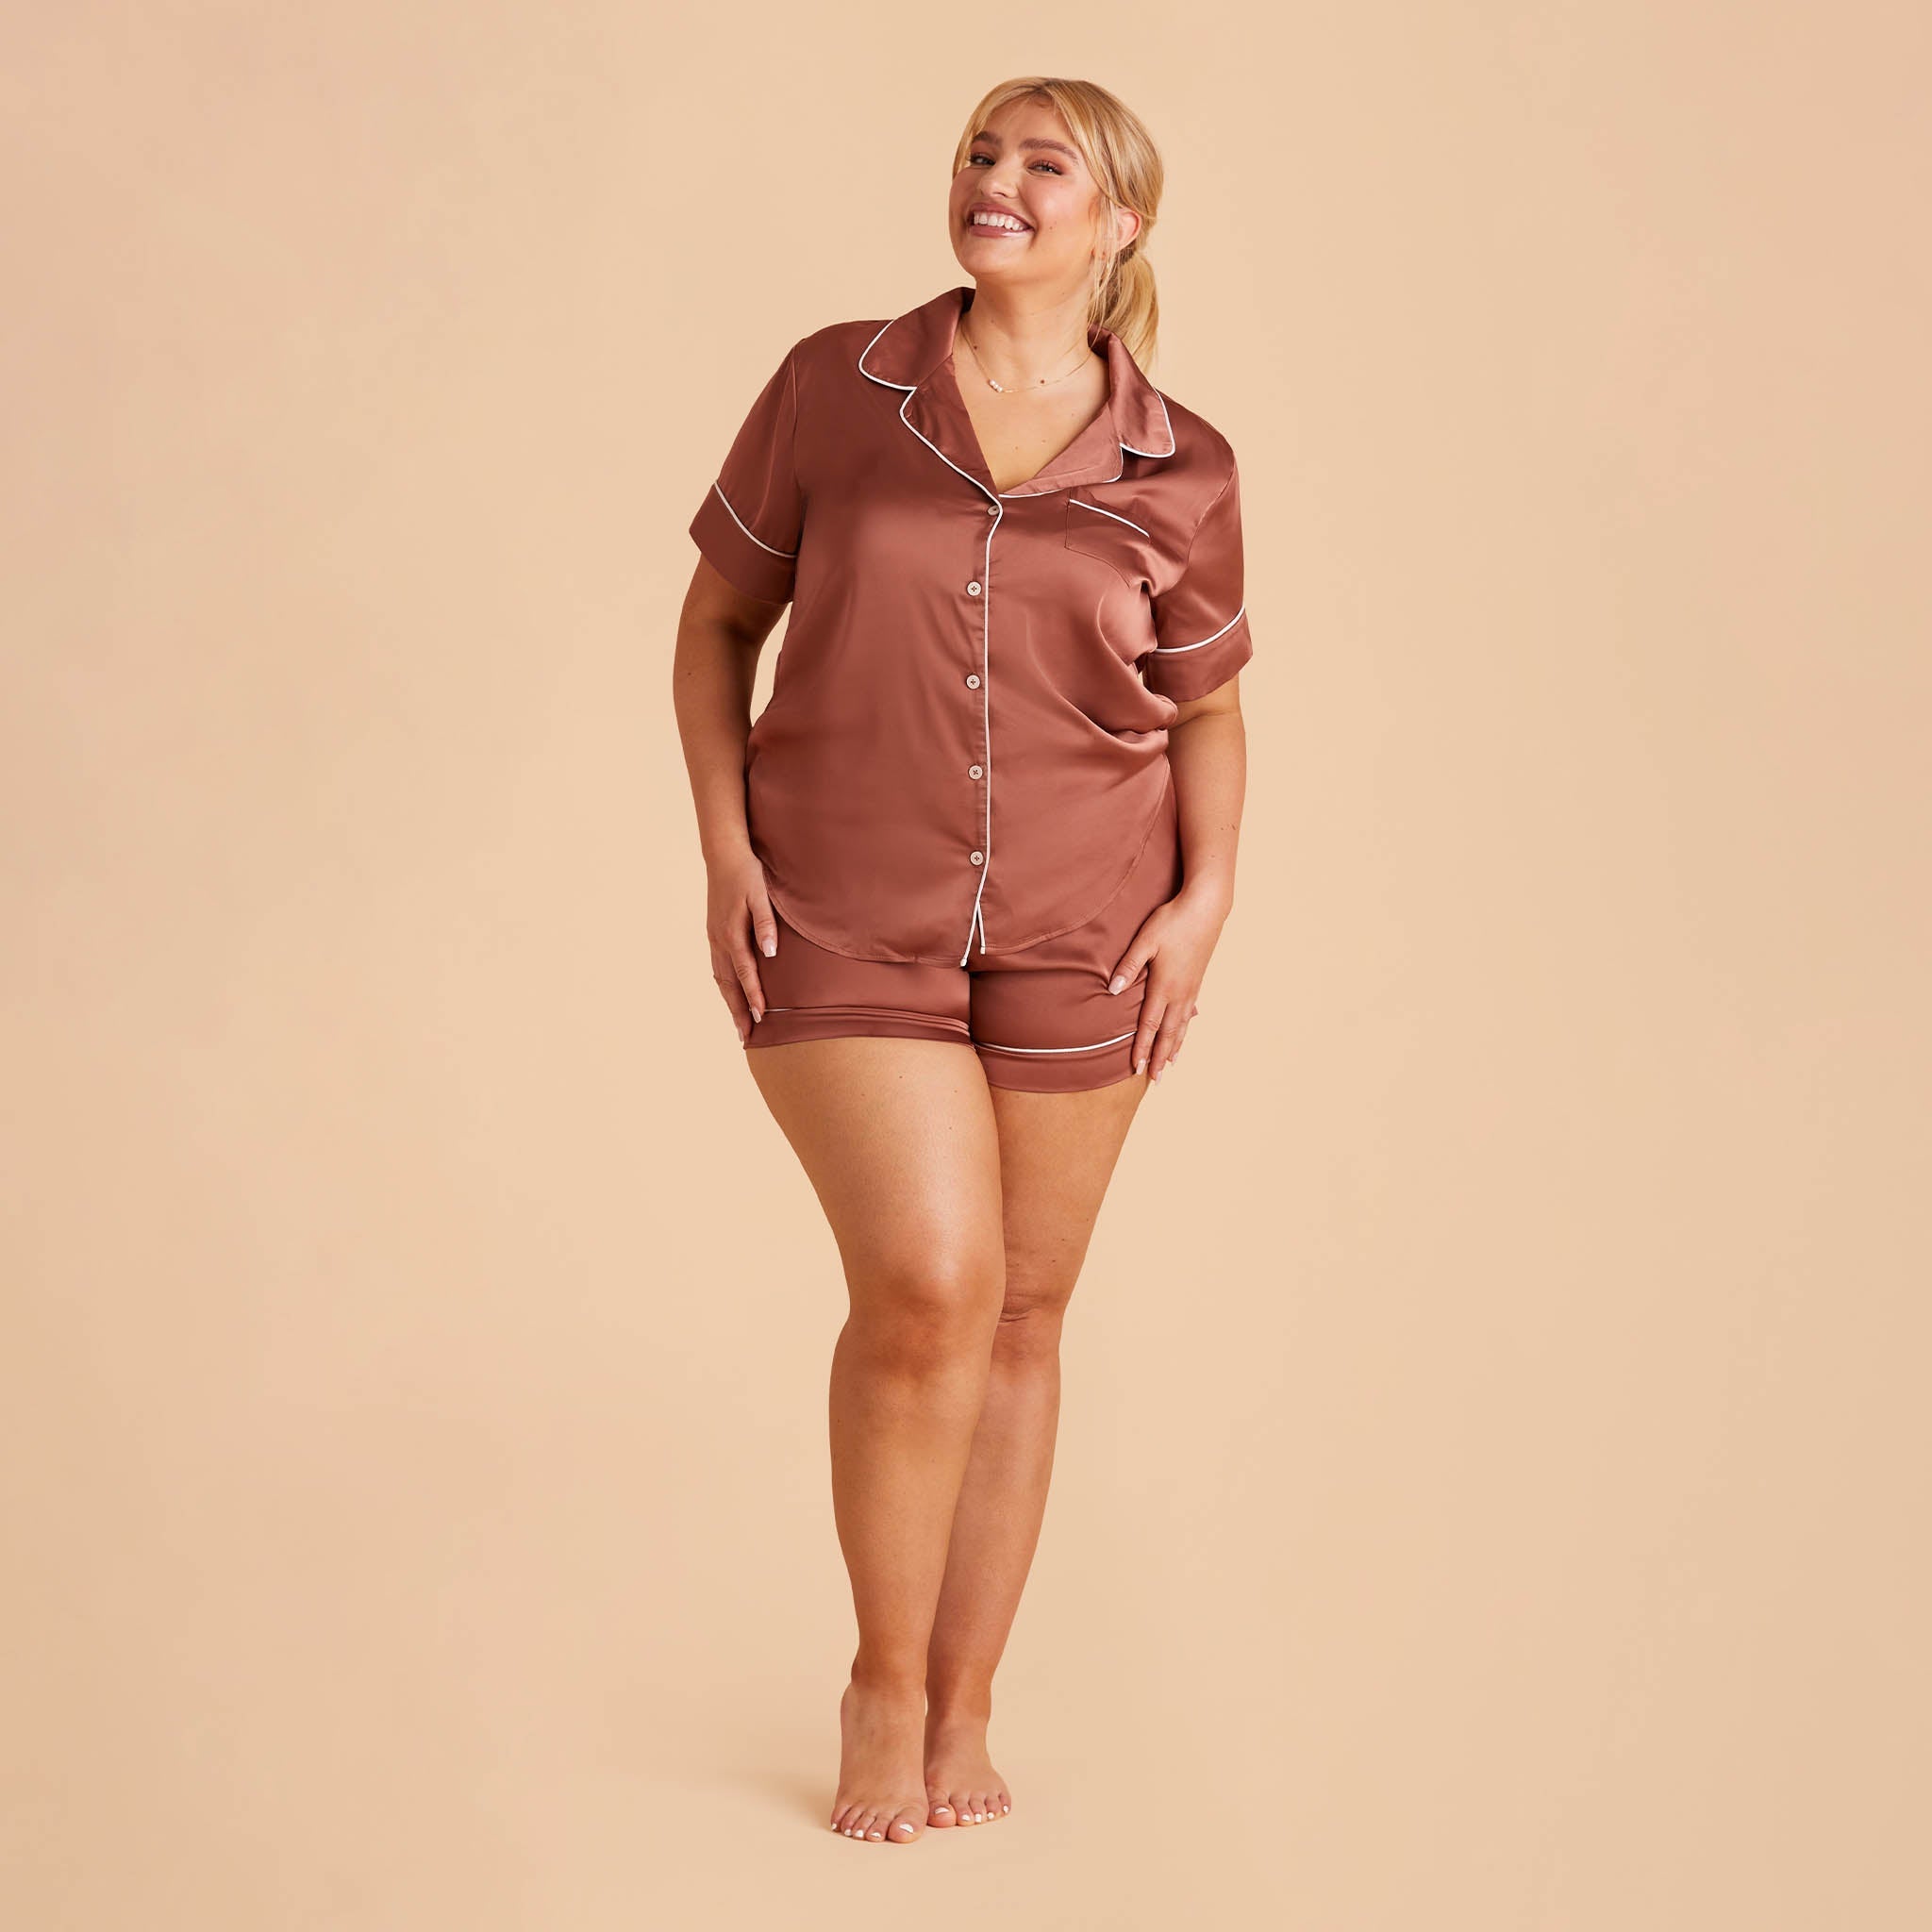 Jonny Satin Short Sleeve Bridesmaid Pajamas With White Piping in desert rose, front view